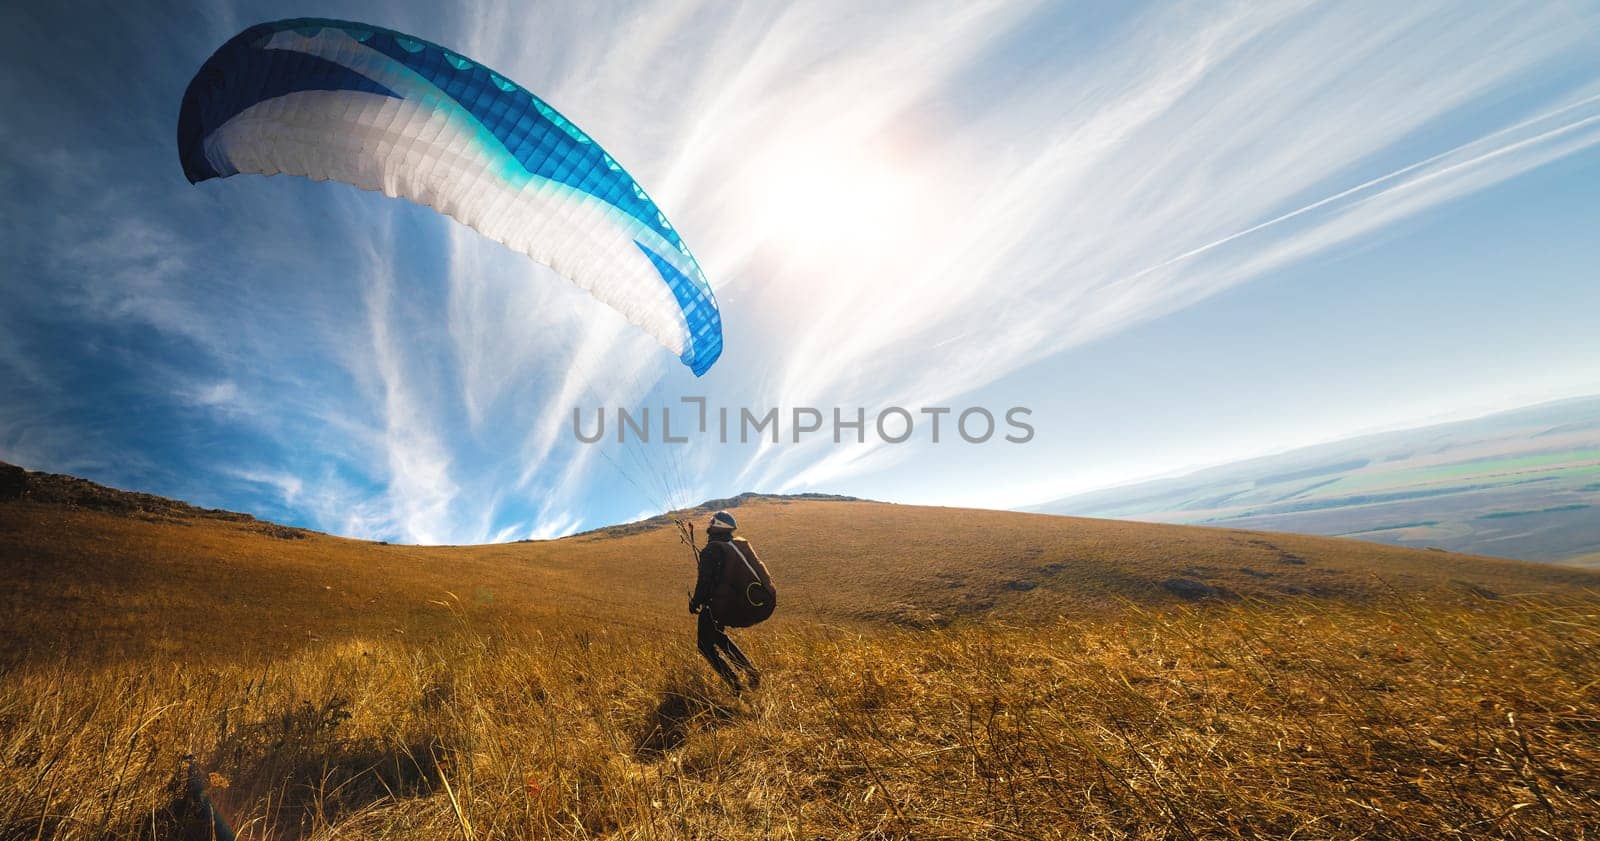 Paragliders take off from a yellow meadow, a man's legs open from the ground, taking off with a parachute upward. Panoramic view of the hills and nature by yanik88